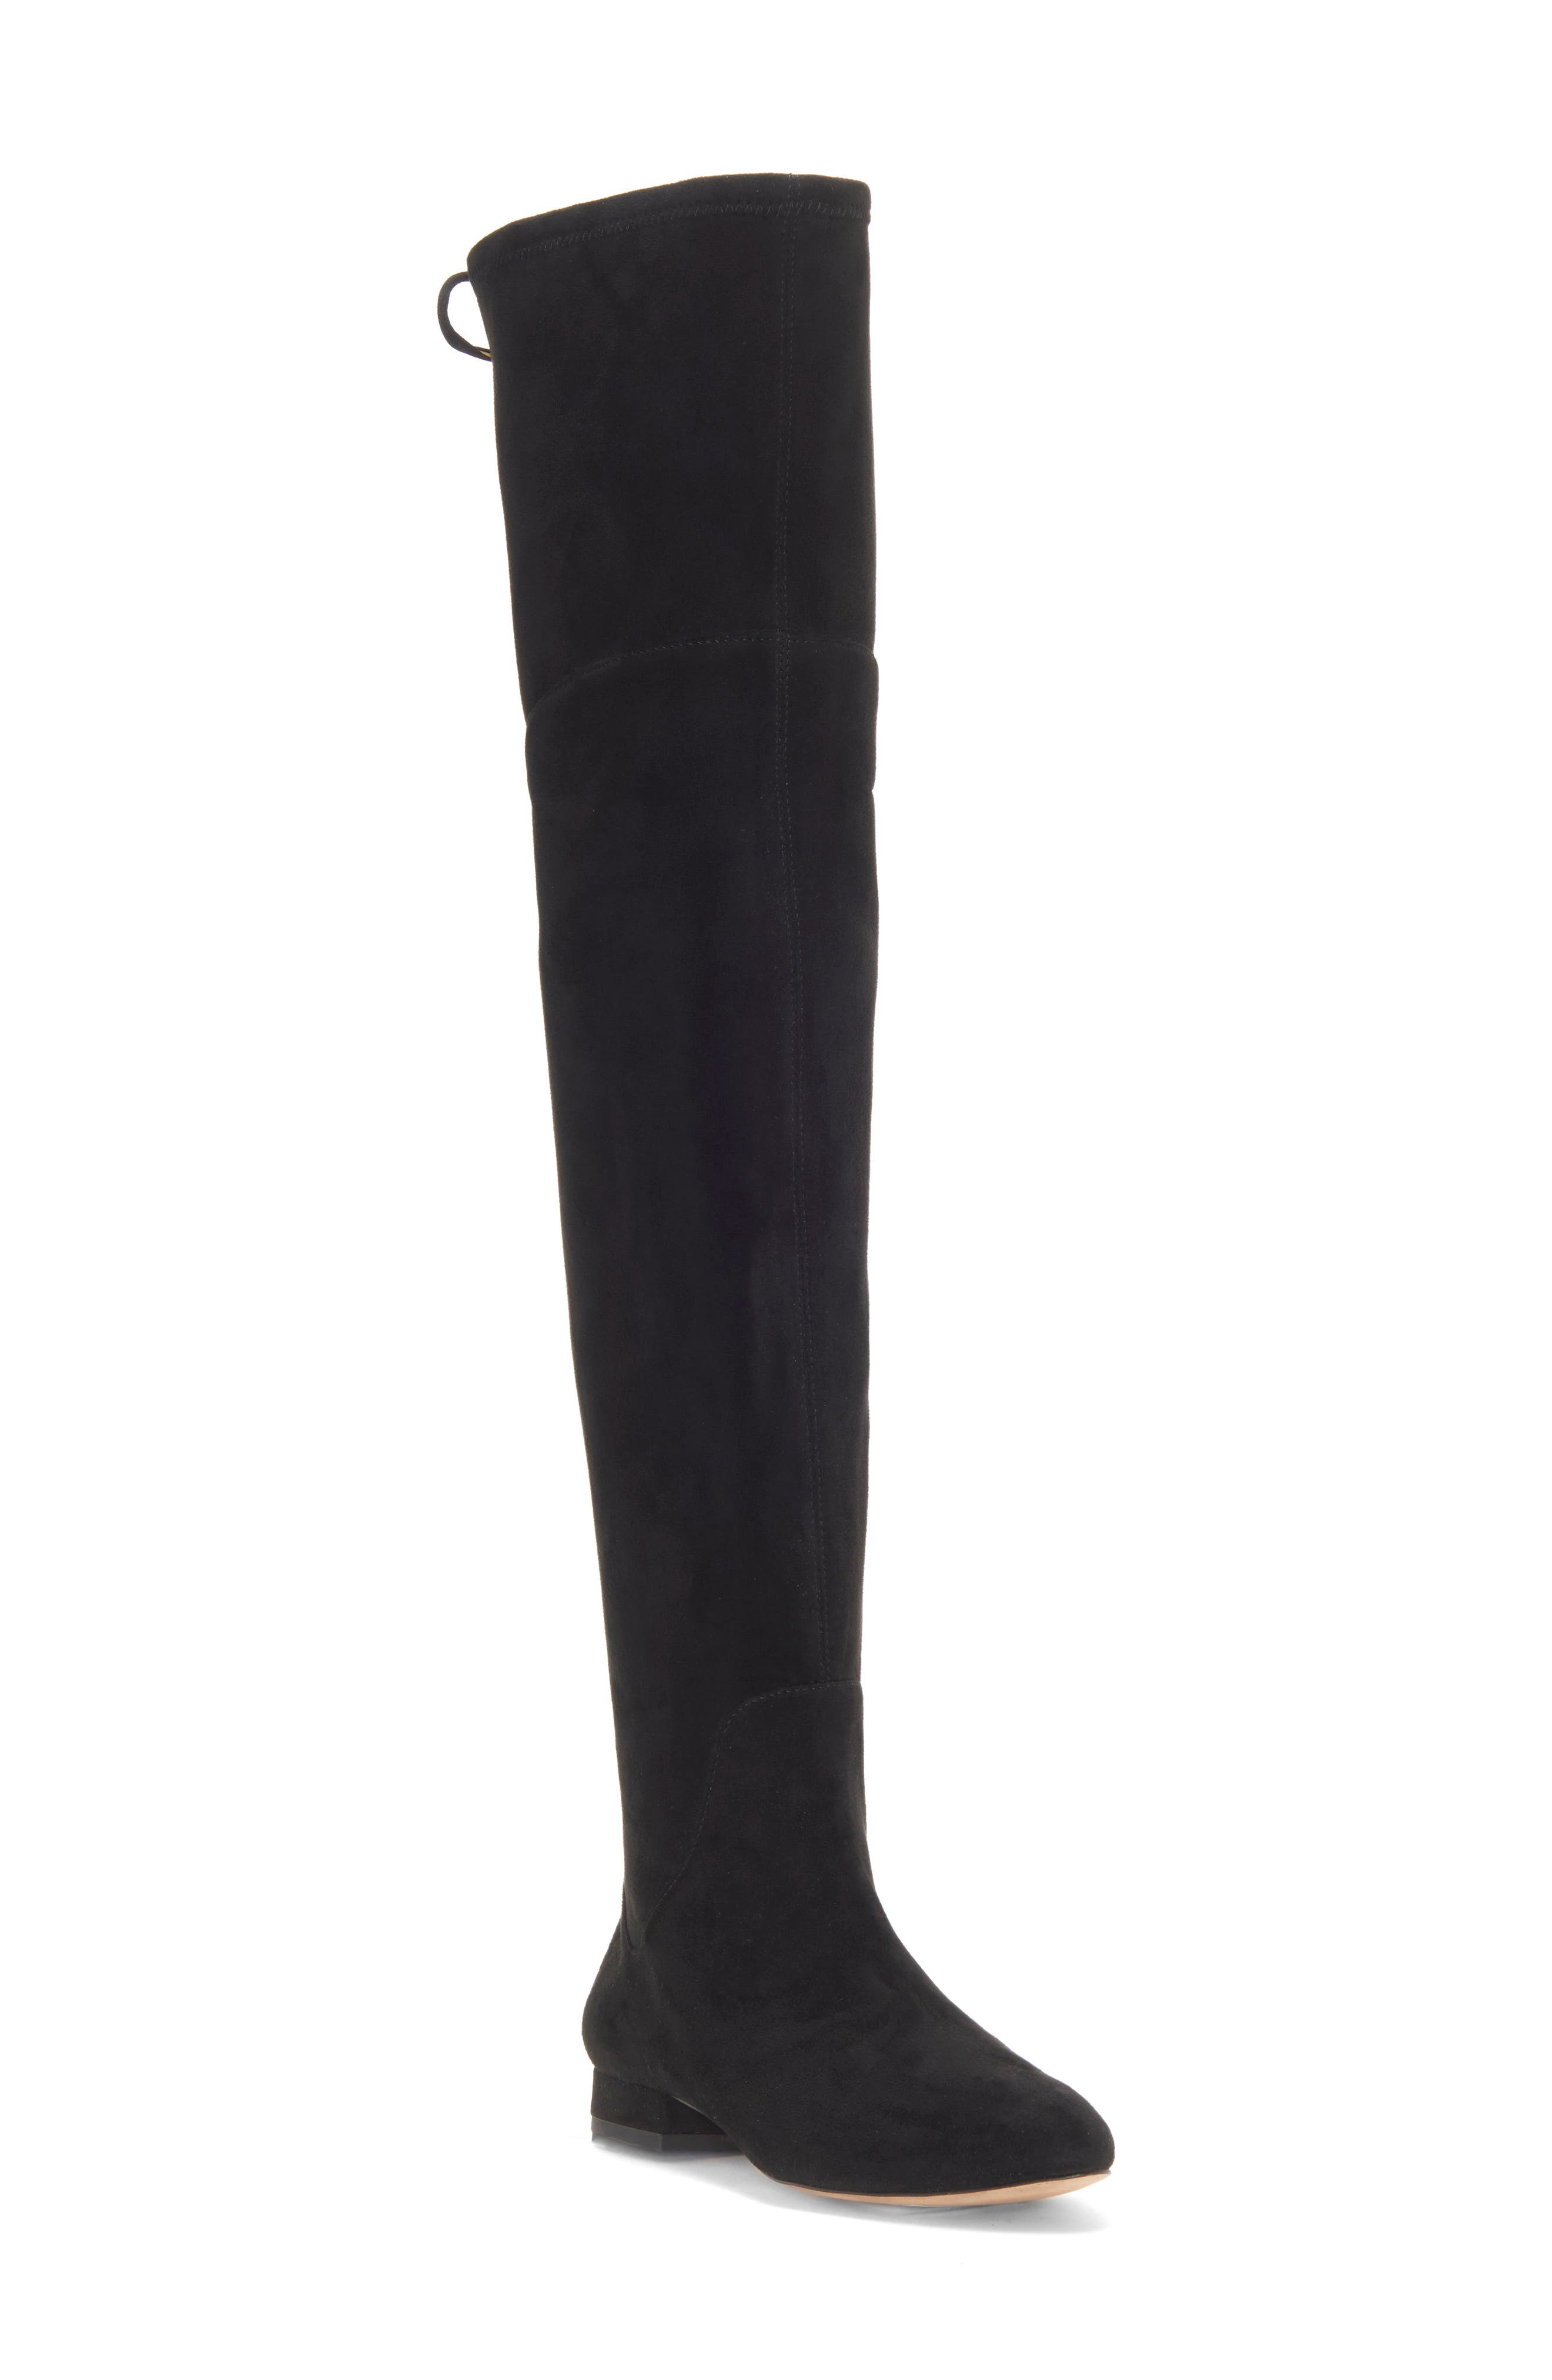 Enzo Angiolini Meana Over the Knee Boot 